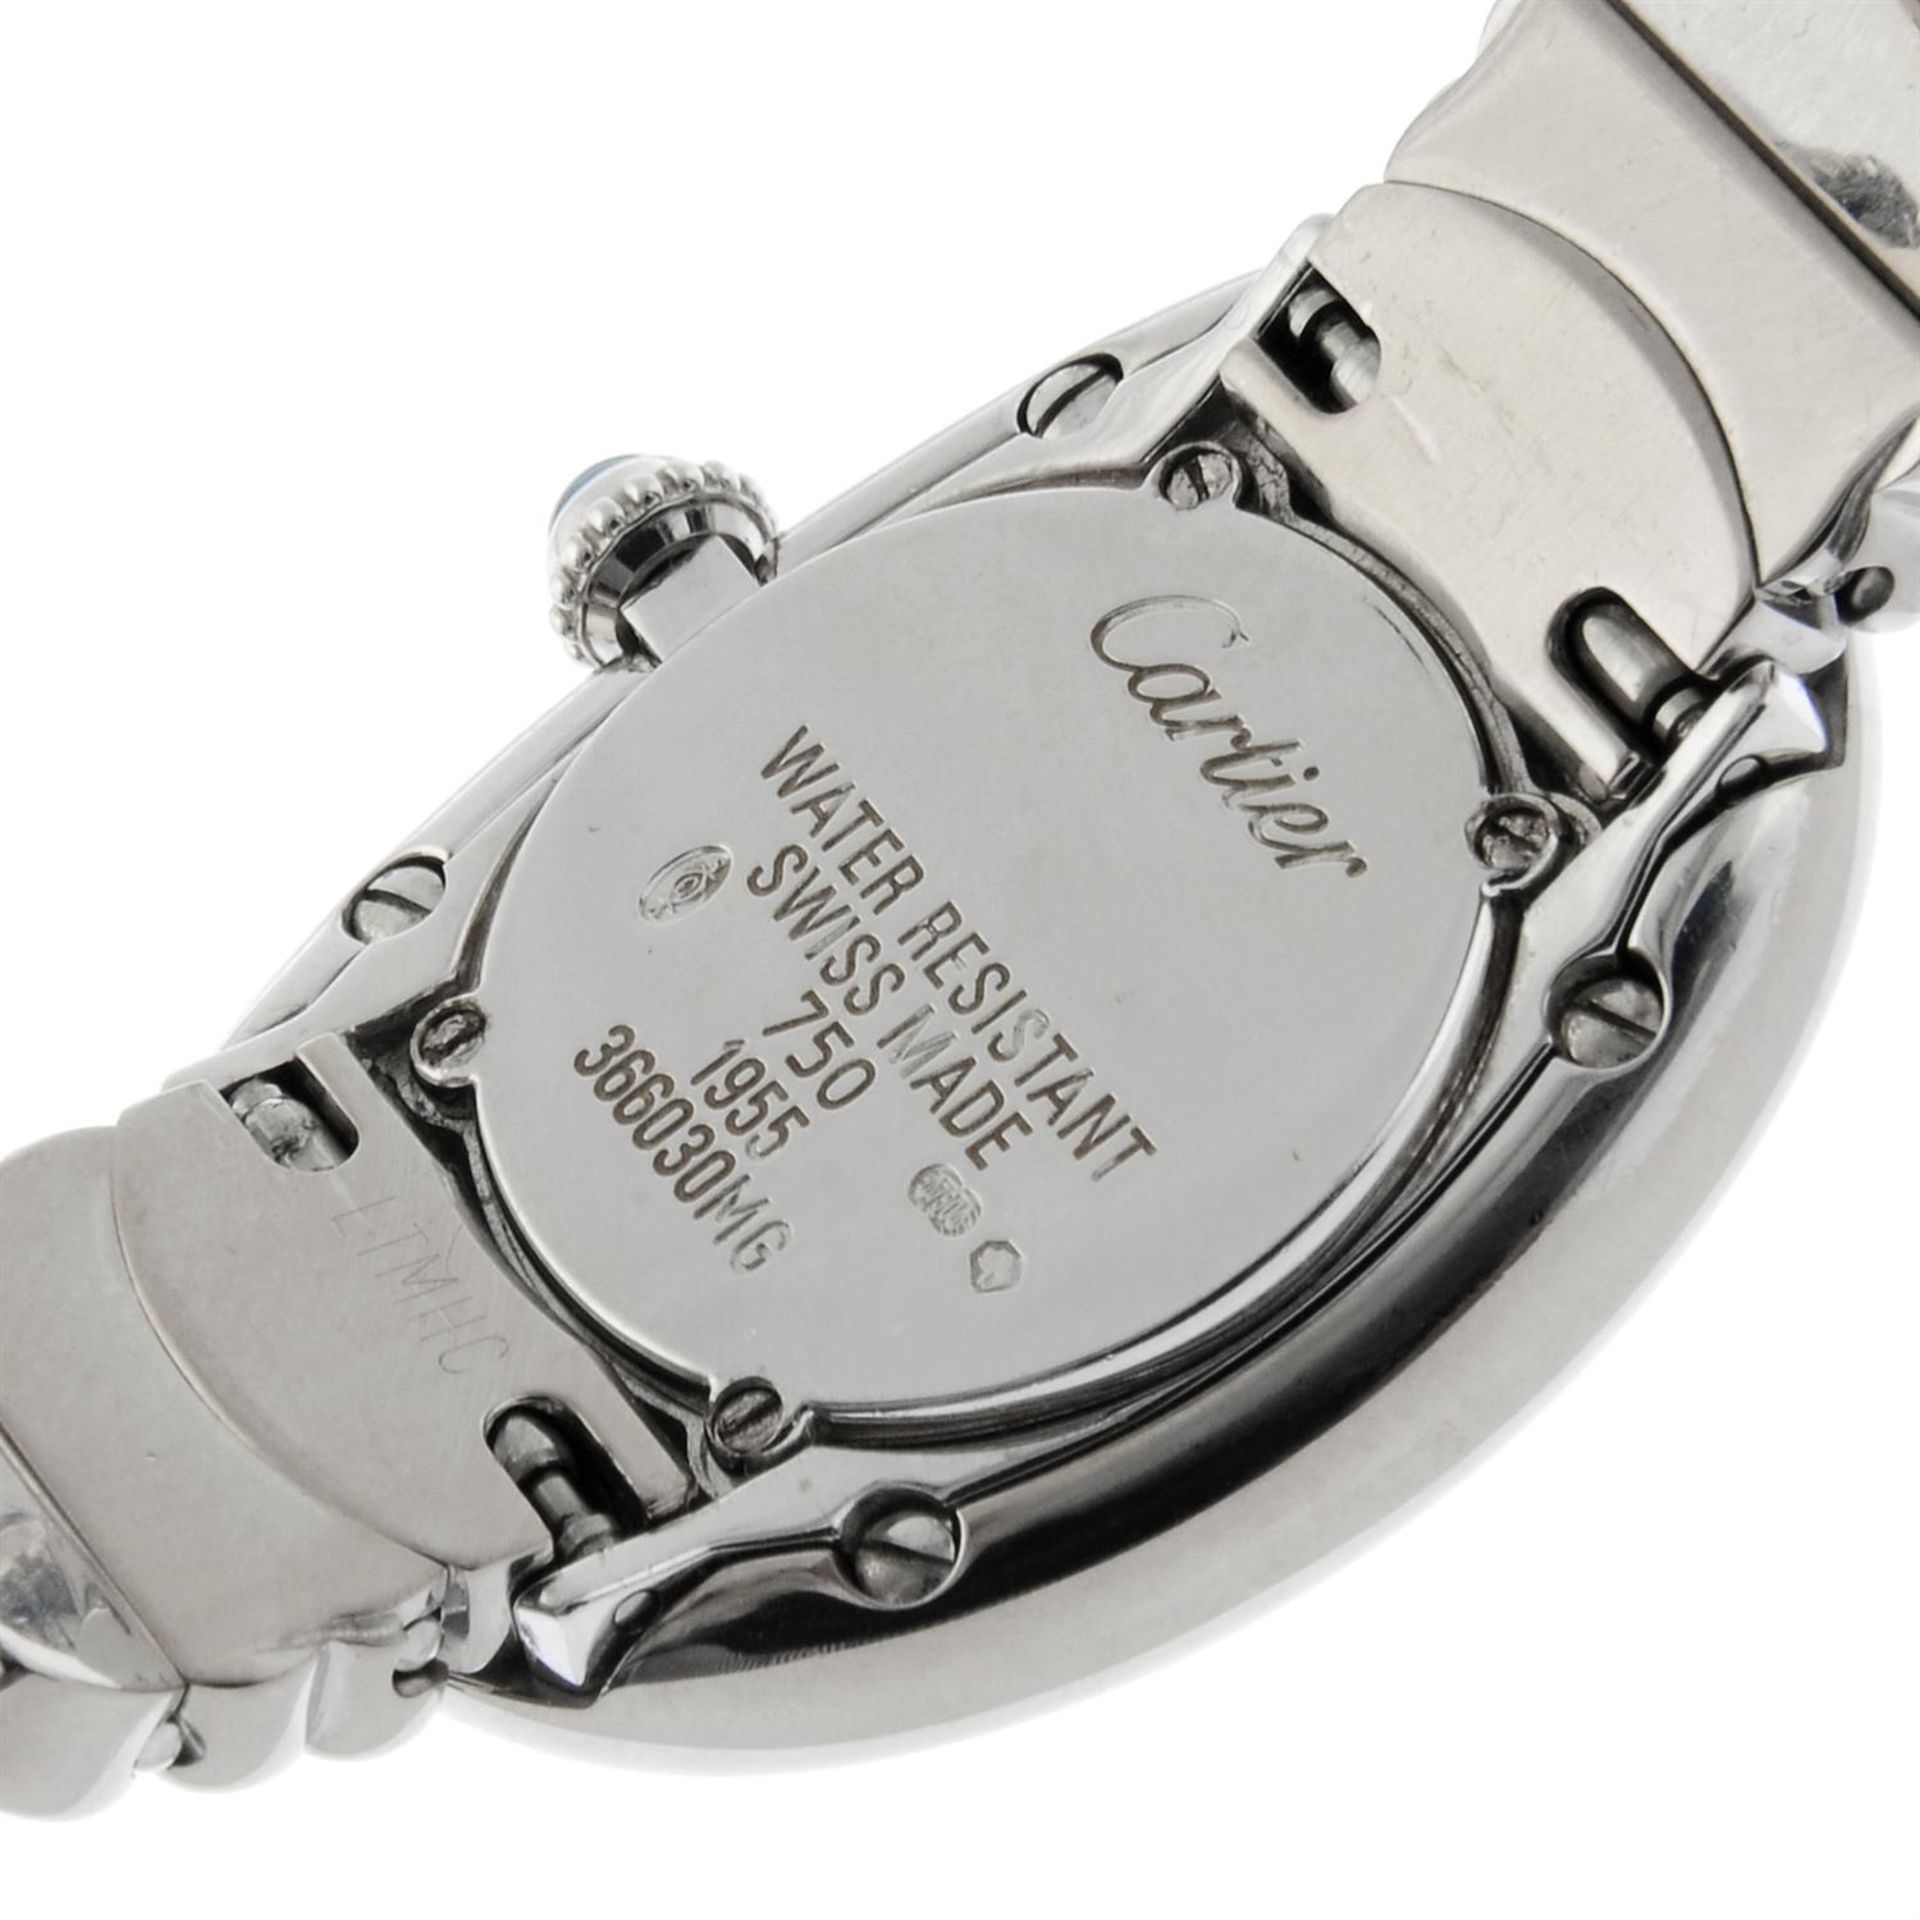 Cartier - a Baignoire watch, 22mm. - Image 5 of 7